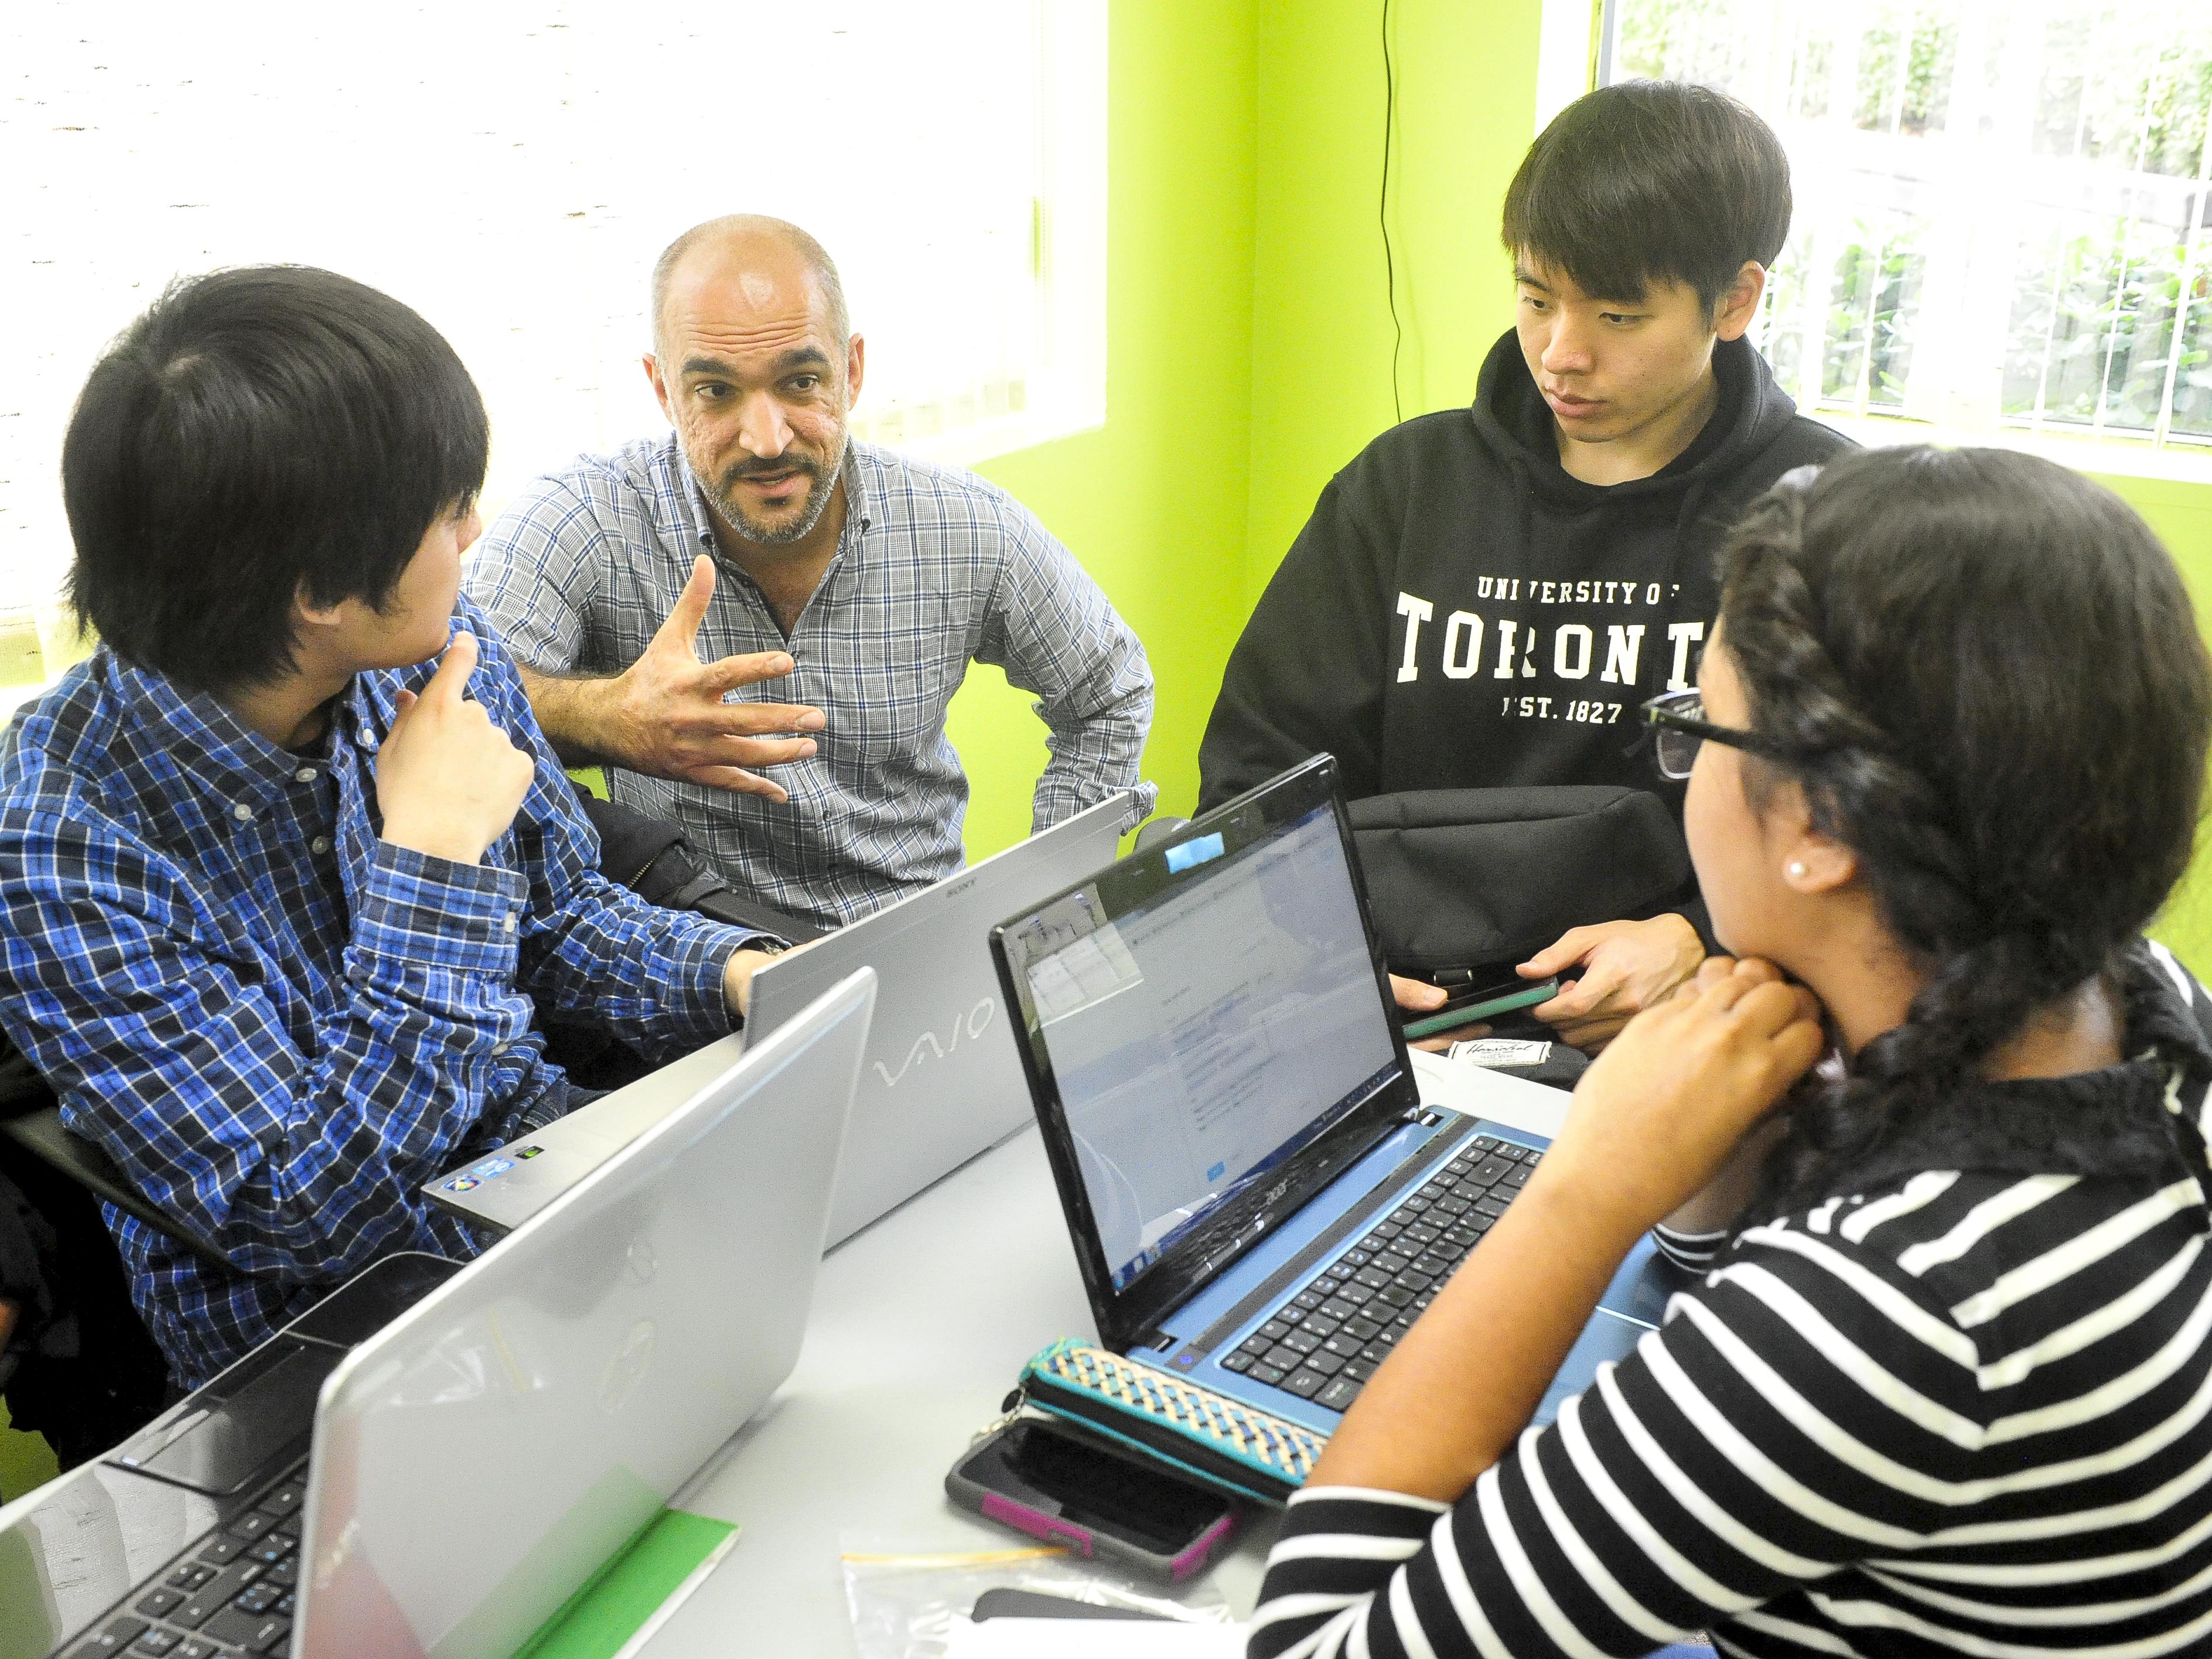 Professor Ahmed Allahwala talking with students working on laptops